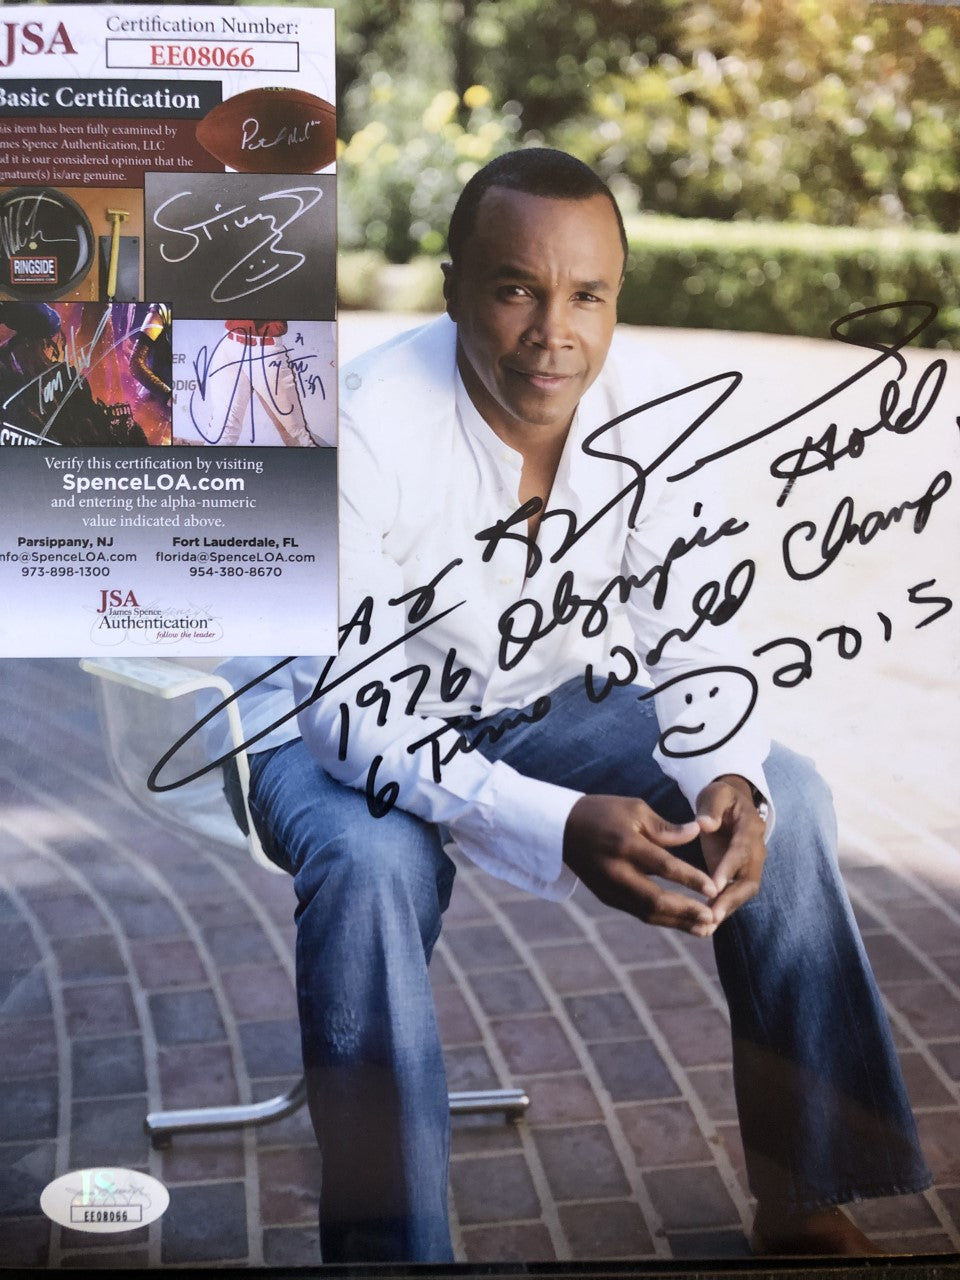 Sugar Ray Leonard Autographed 8x10 Boxing Photo Signed with Ultra inscription JSA Cert